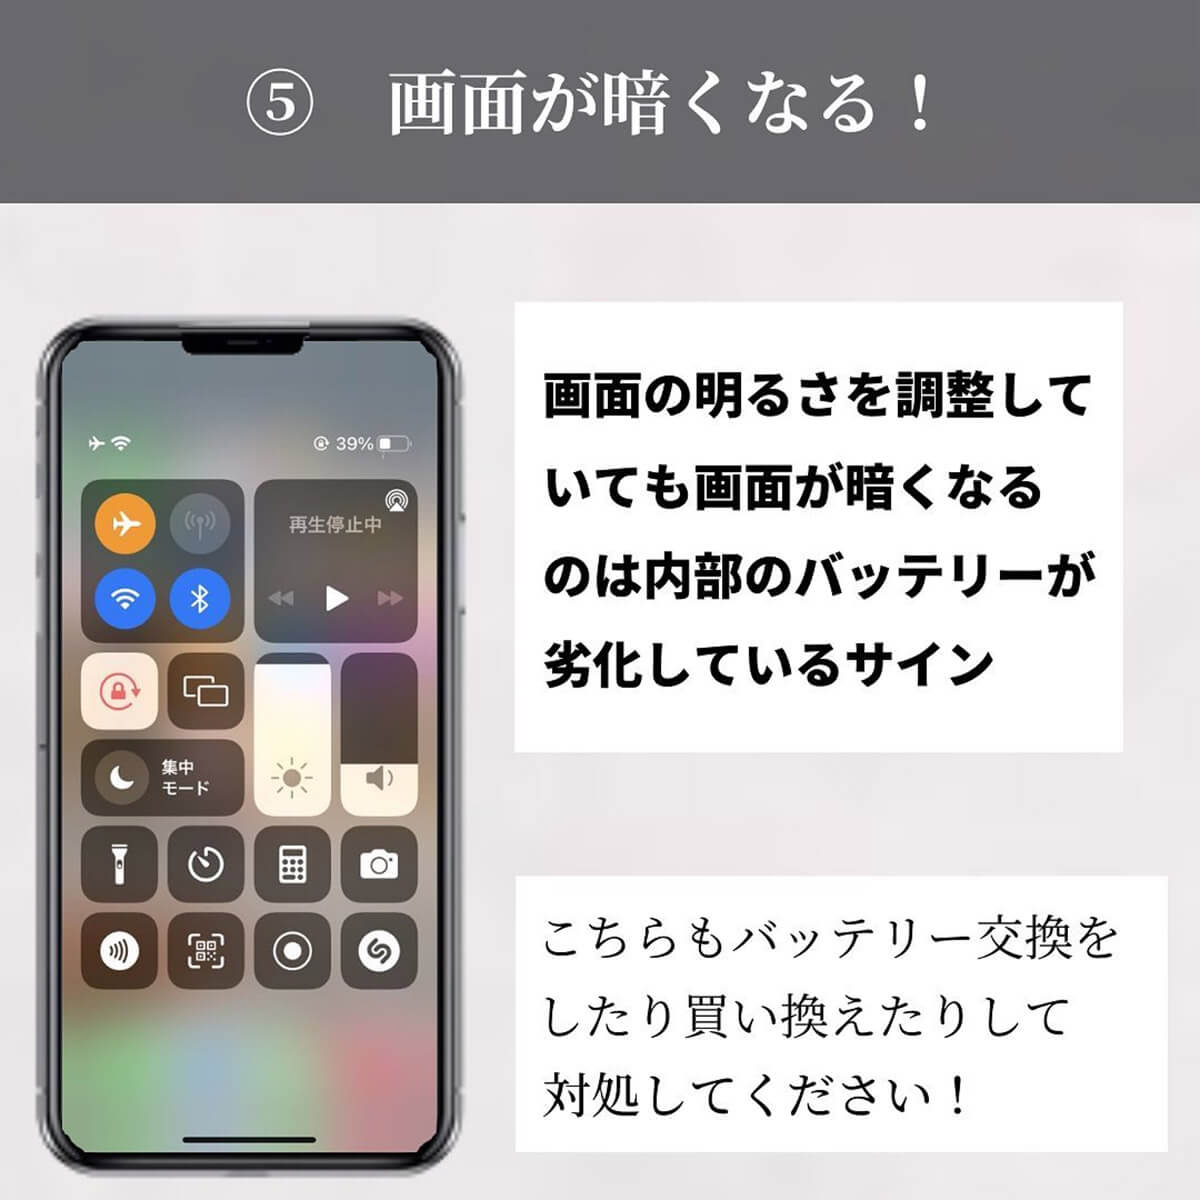 iPhoneの買い替え時を確認する方法5